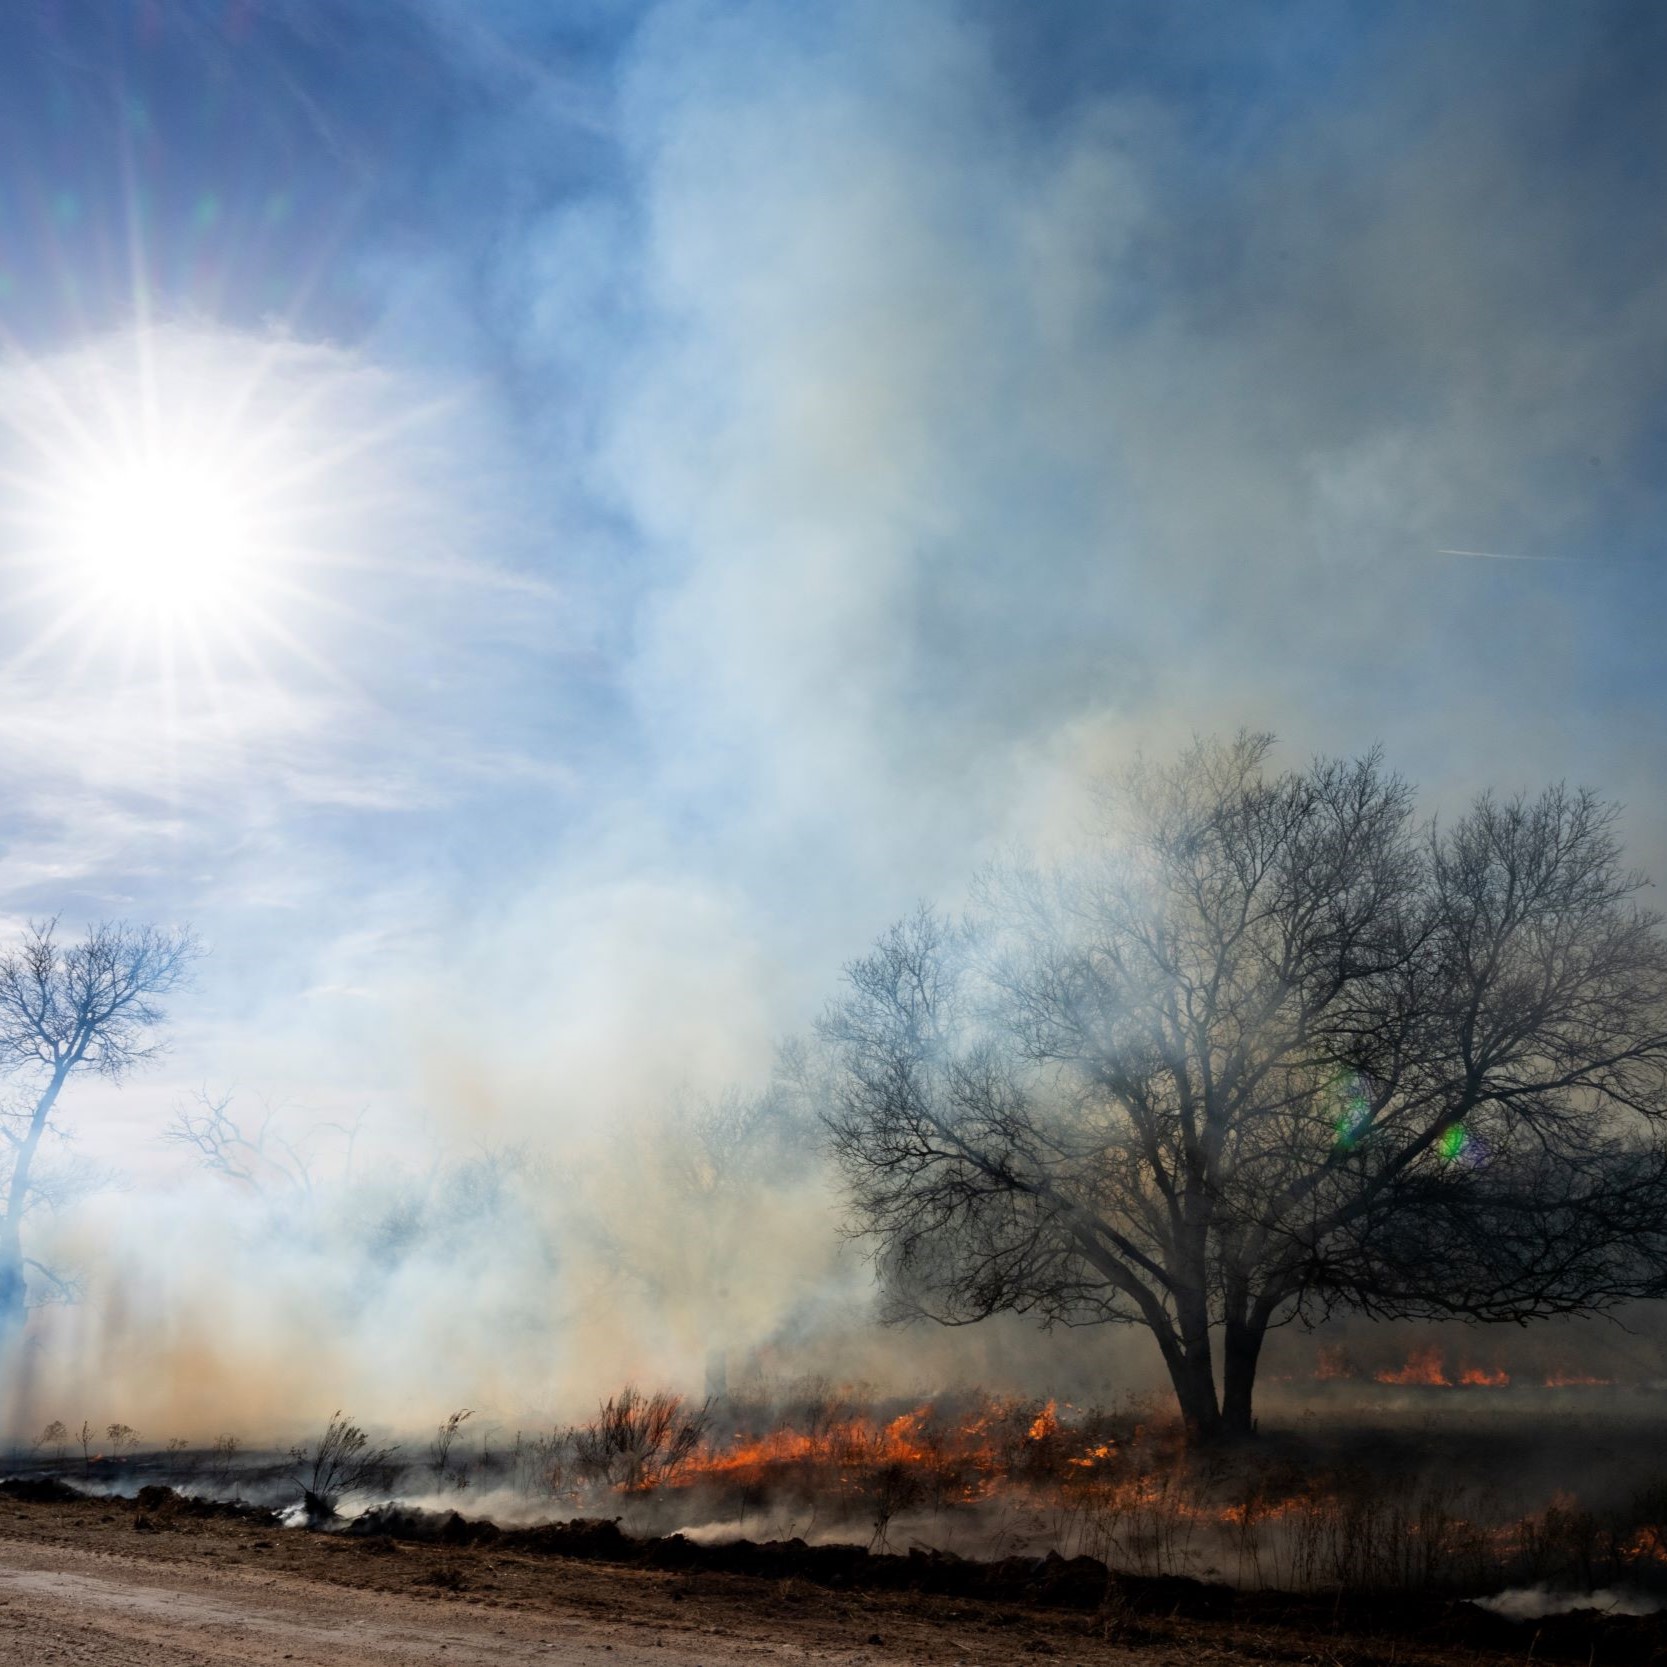 Texans should stay prepared as extreme wildfire danger increases